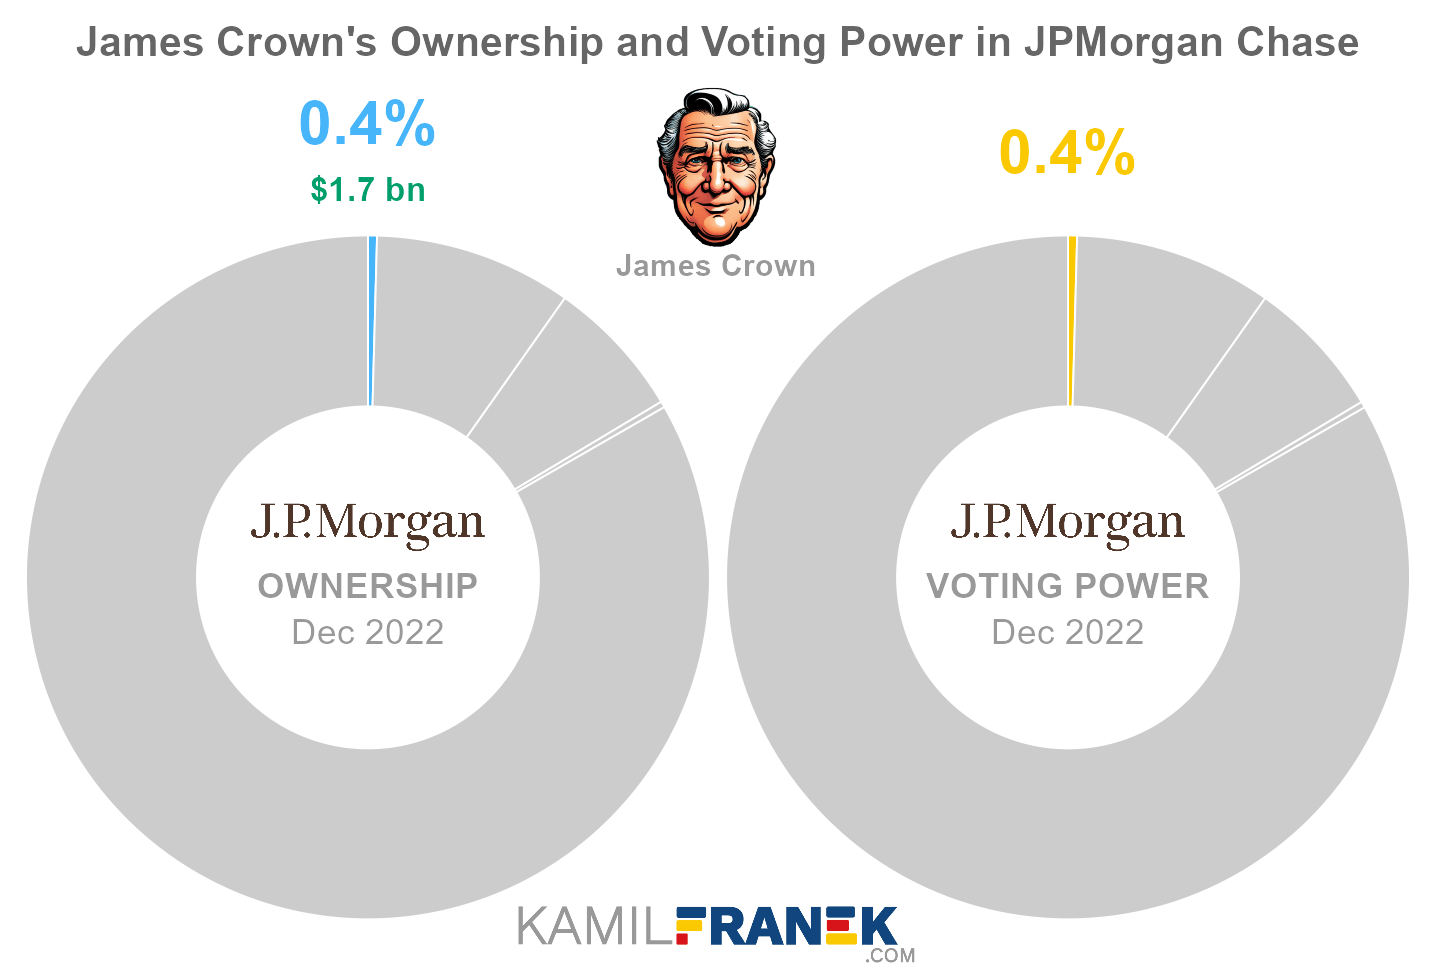 James Crown's share ownership and voting power in JPMorgan Chase (chart)